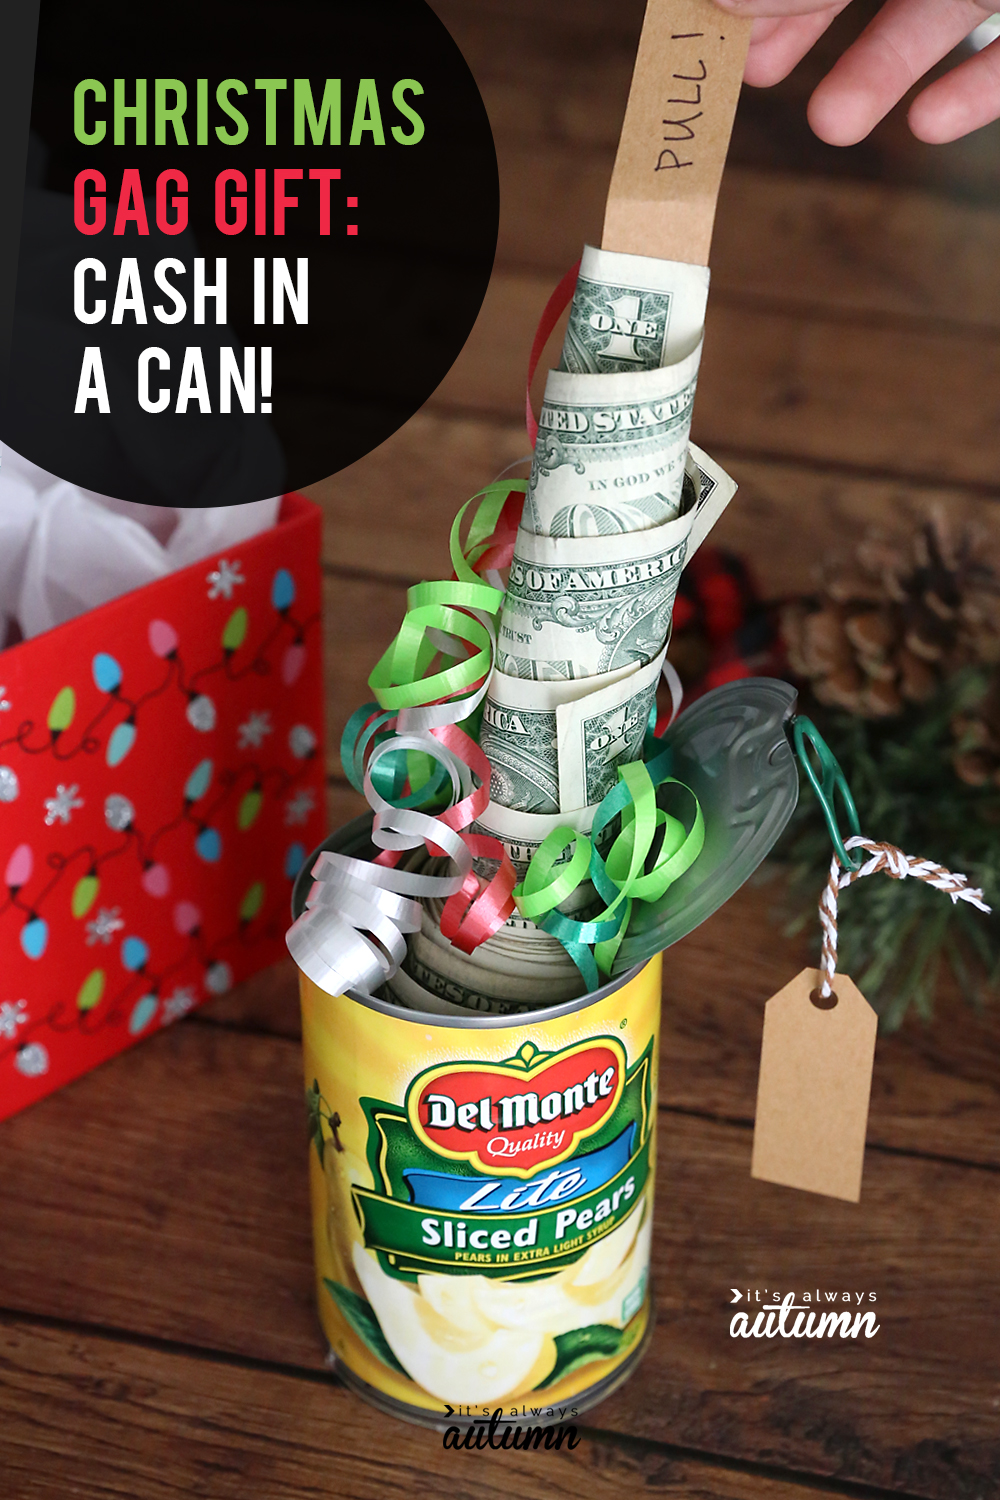 Funny Christmas money gift idea Cash in a can  It's Always Autumn